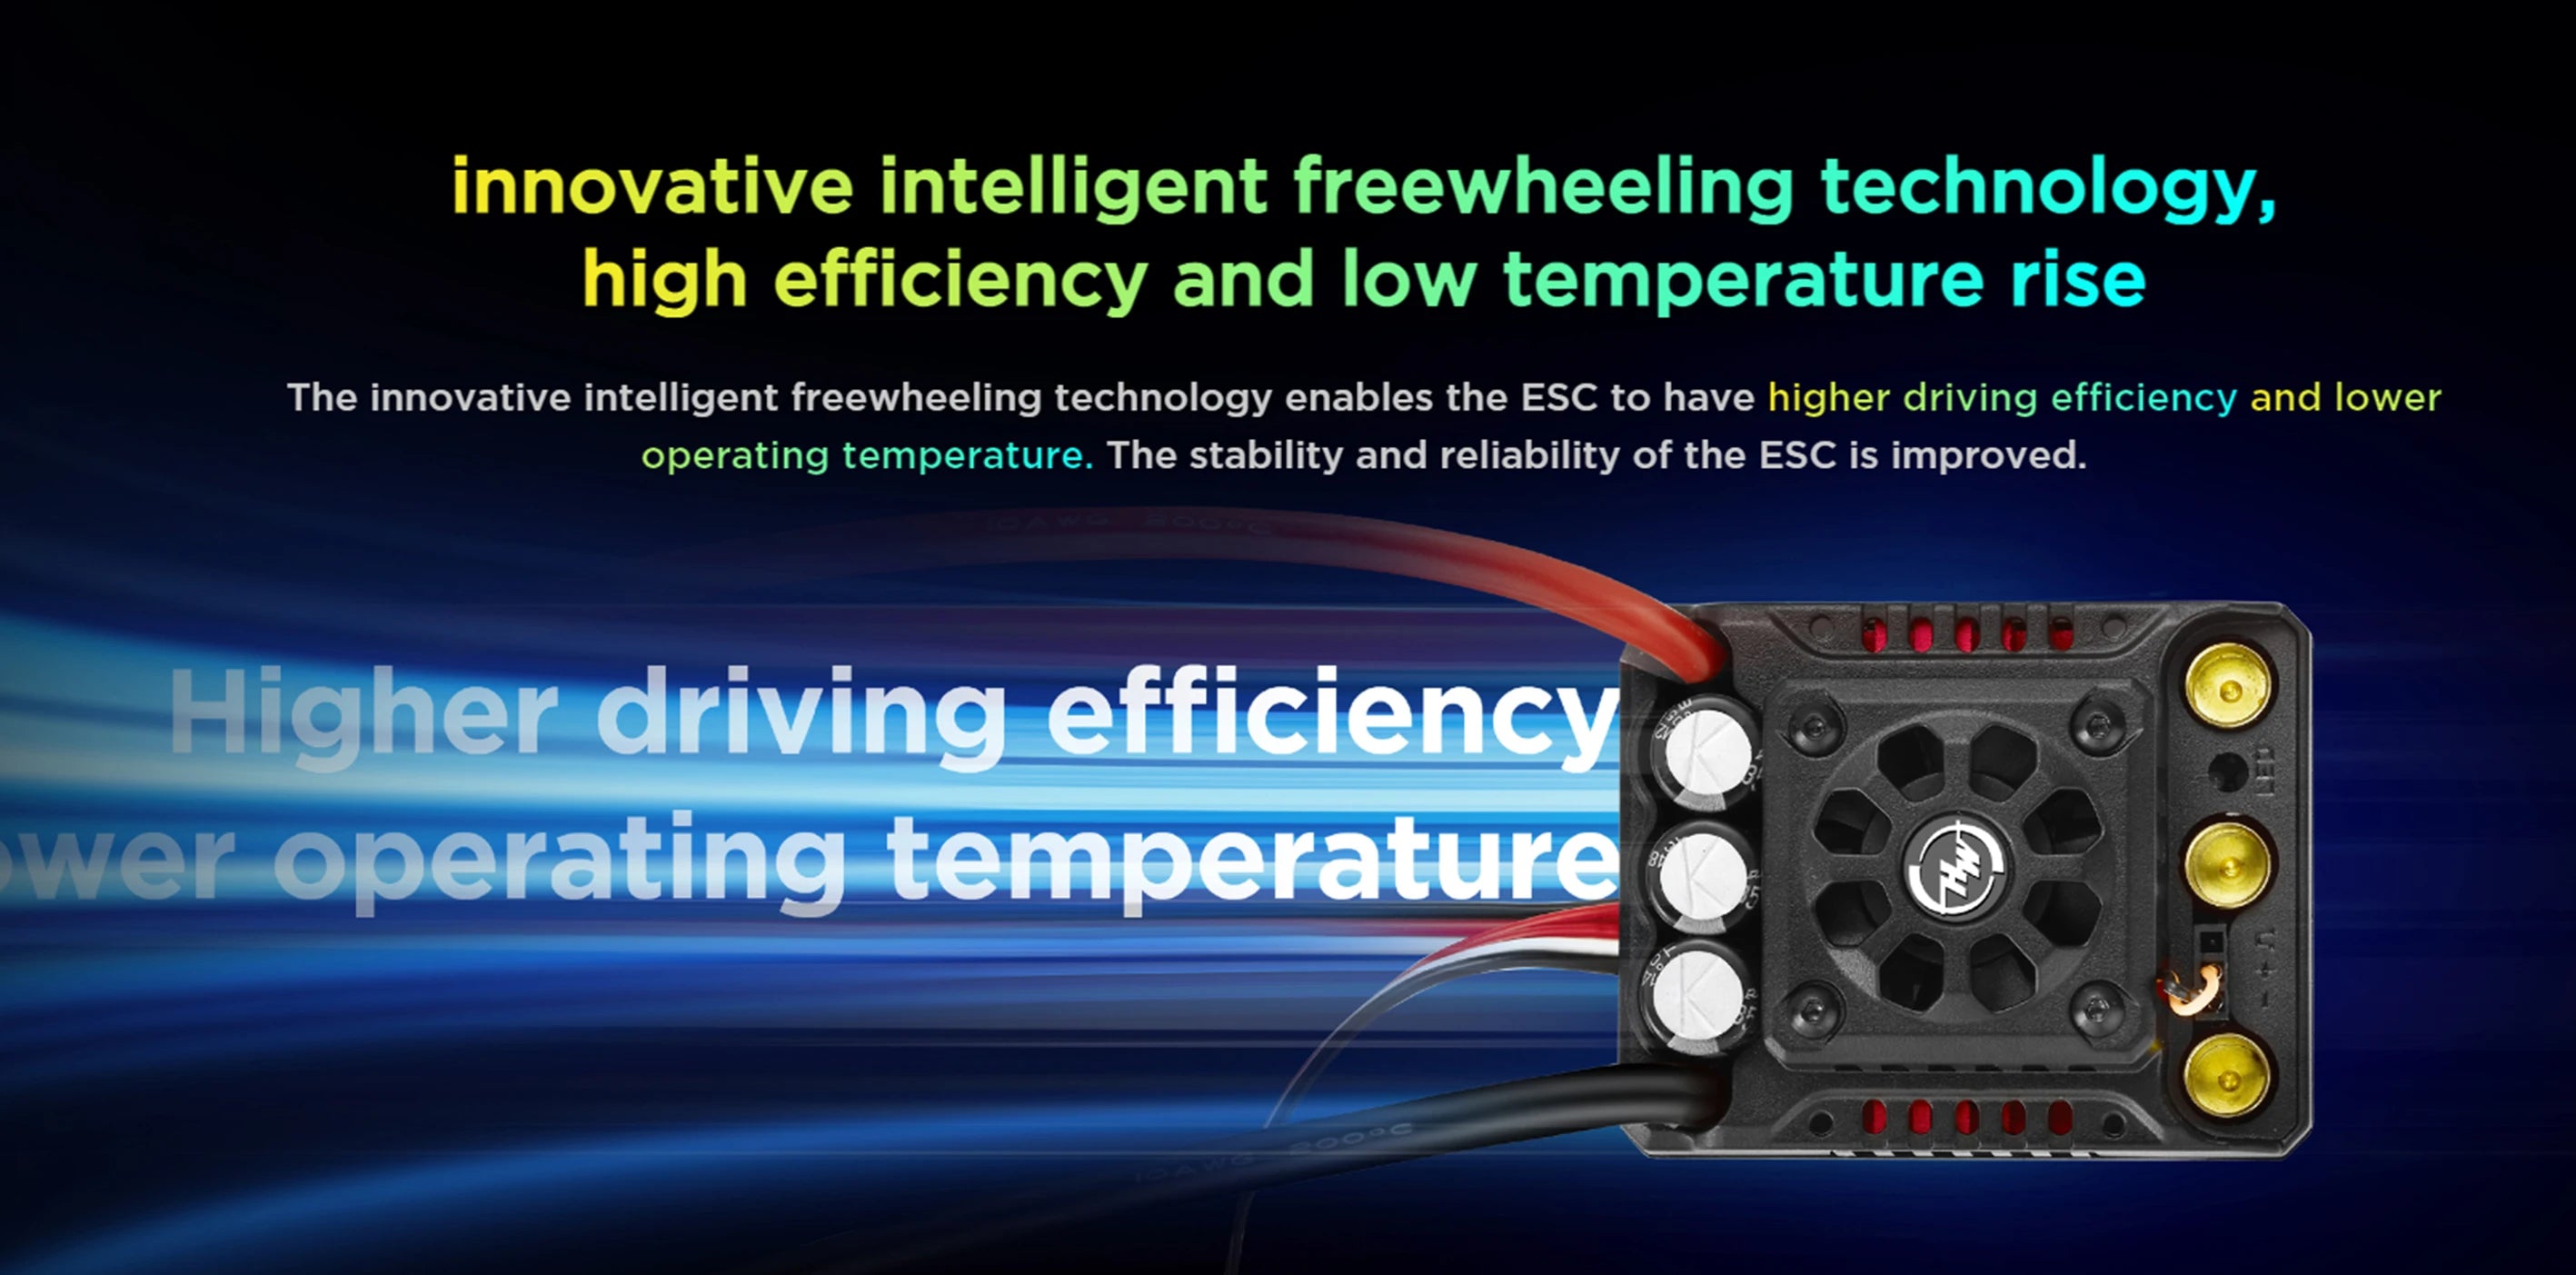 intelligent freewheeling technology enables the ESC to have higher driving efficiency and lower operating temperature